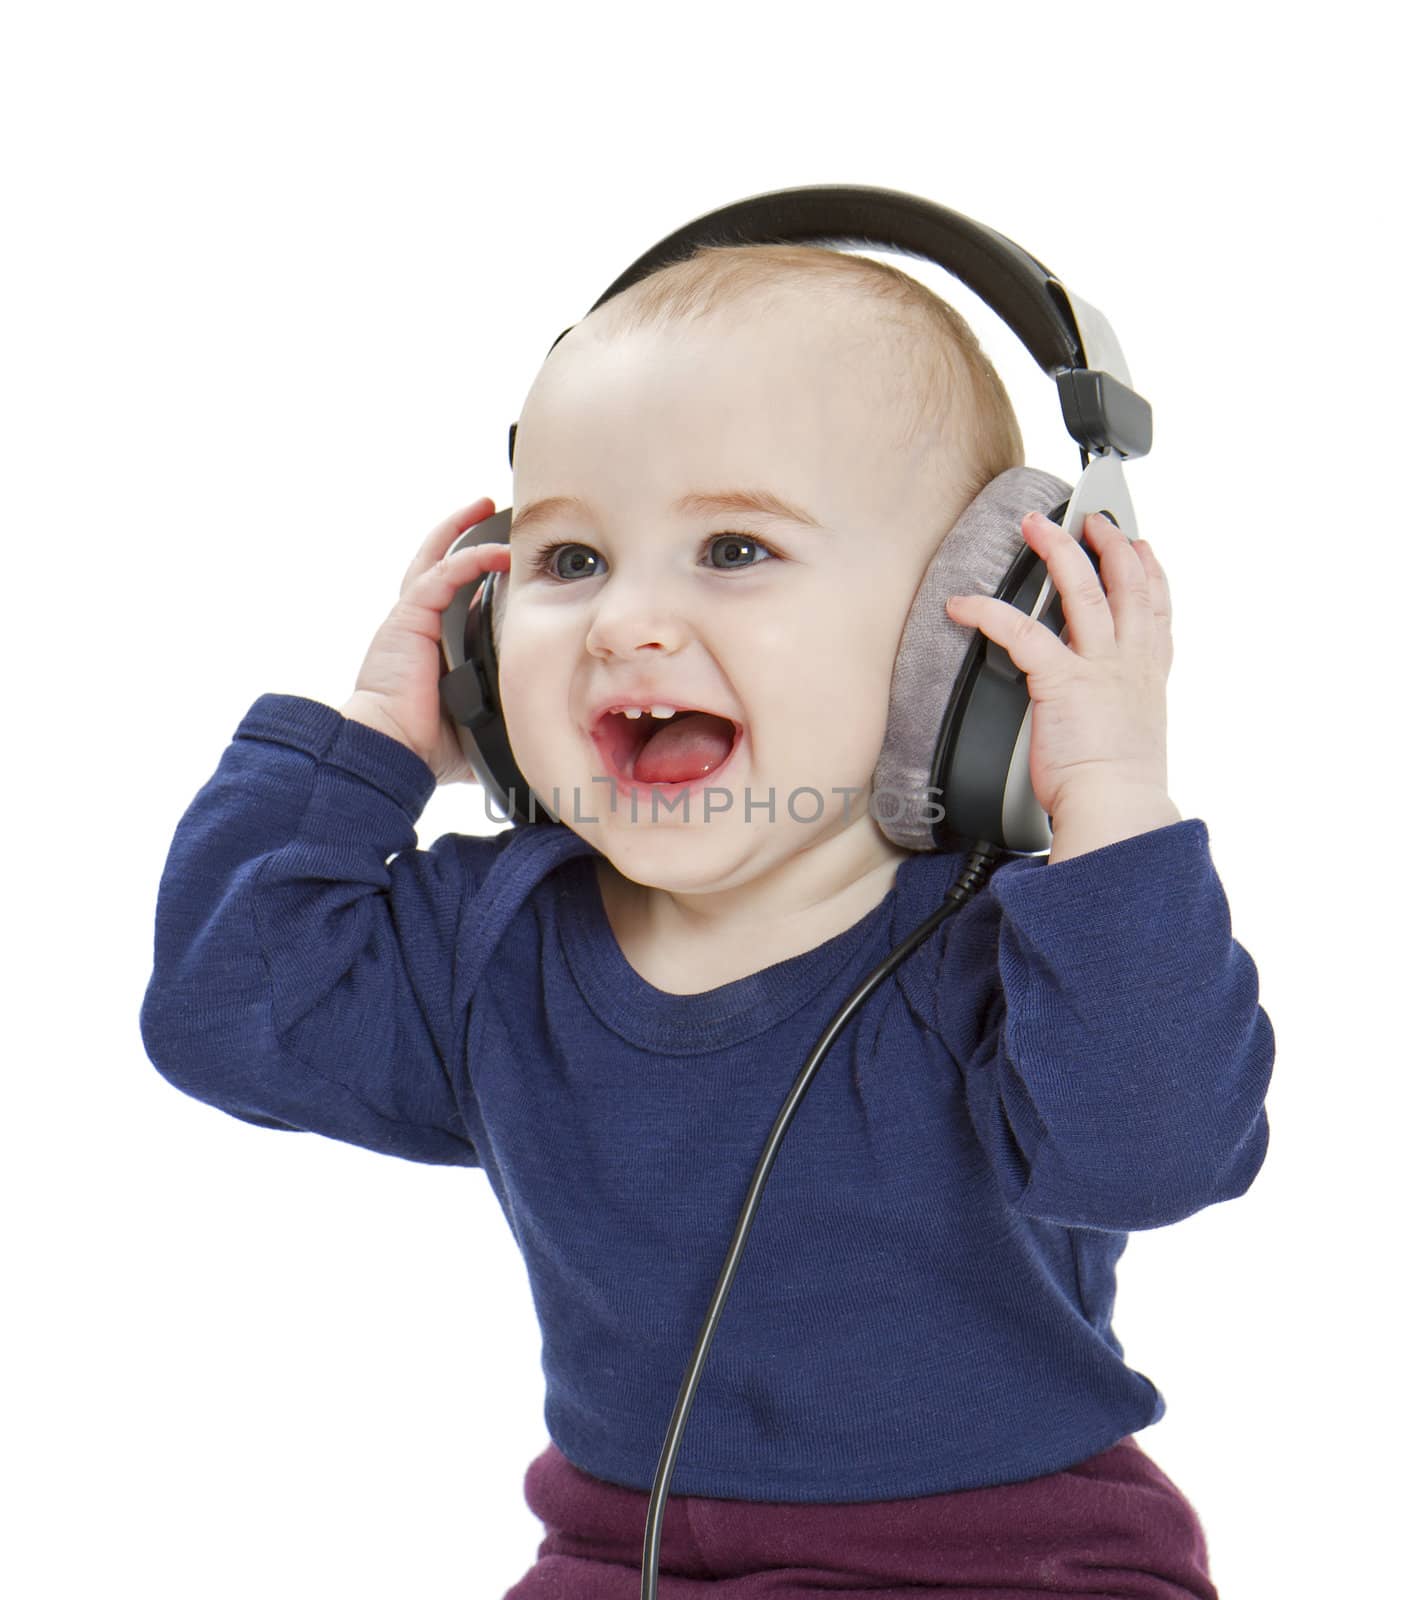 young child with ear-phones listening to music by gewoldi